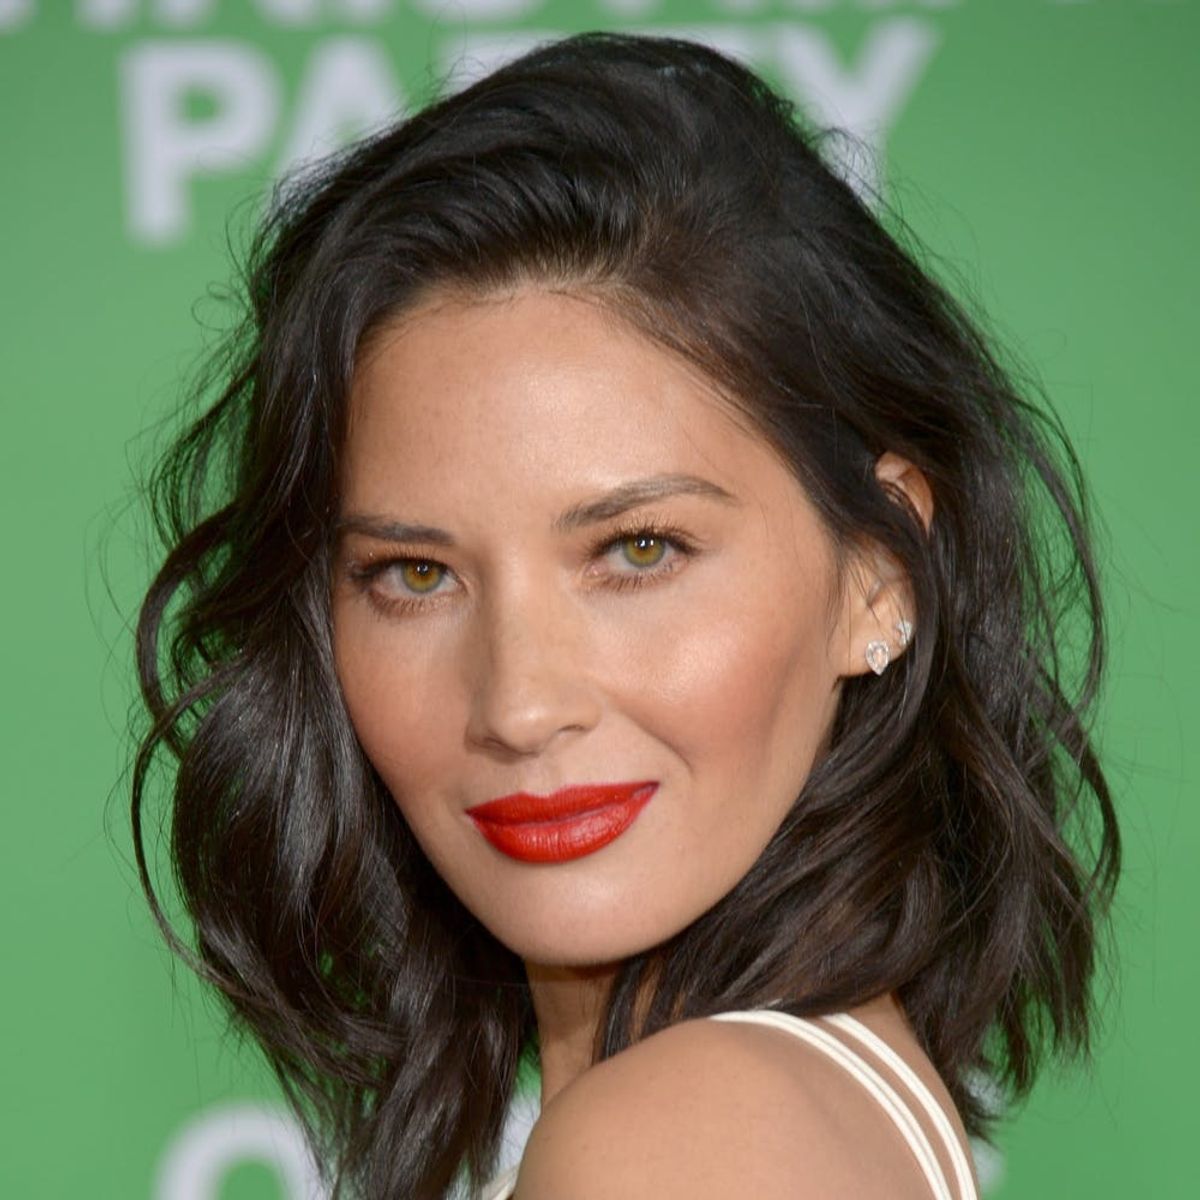 Olivia Munn Just Dyed Her Hair for the First Time… Ever